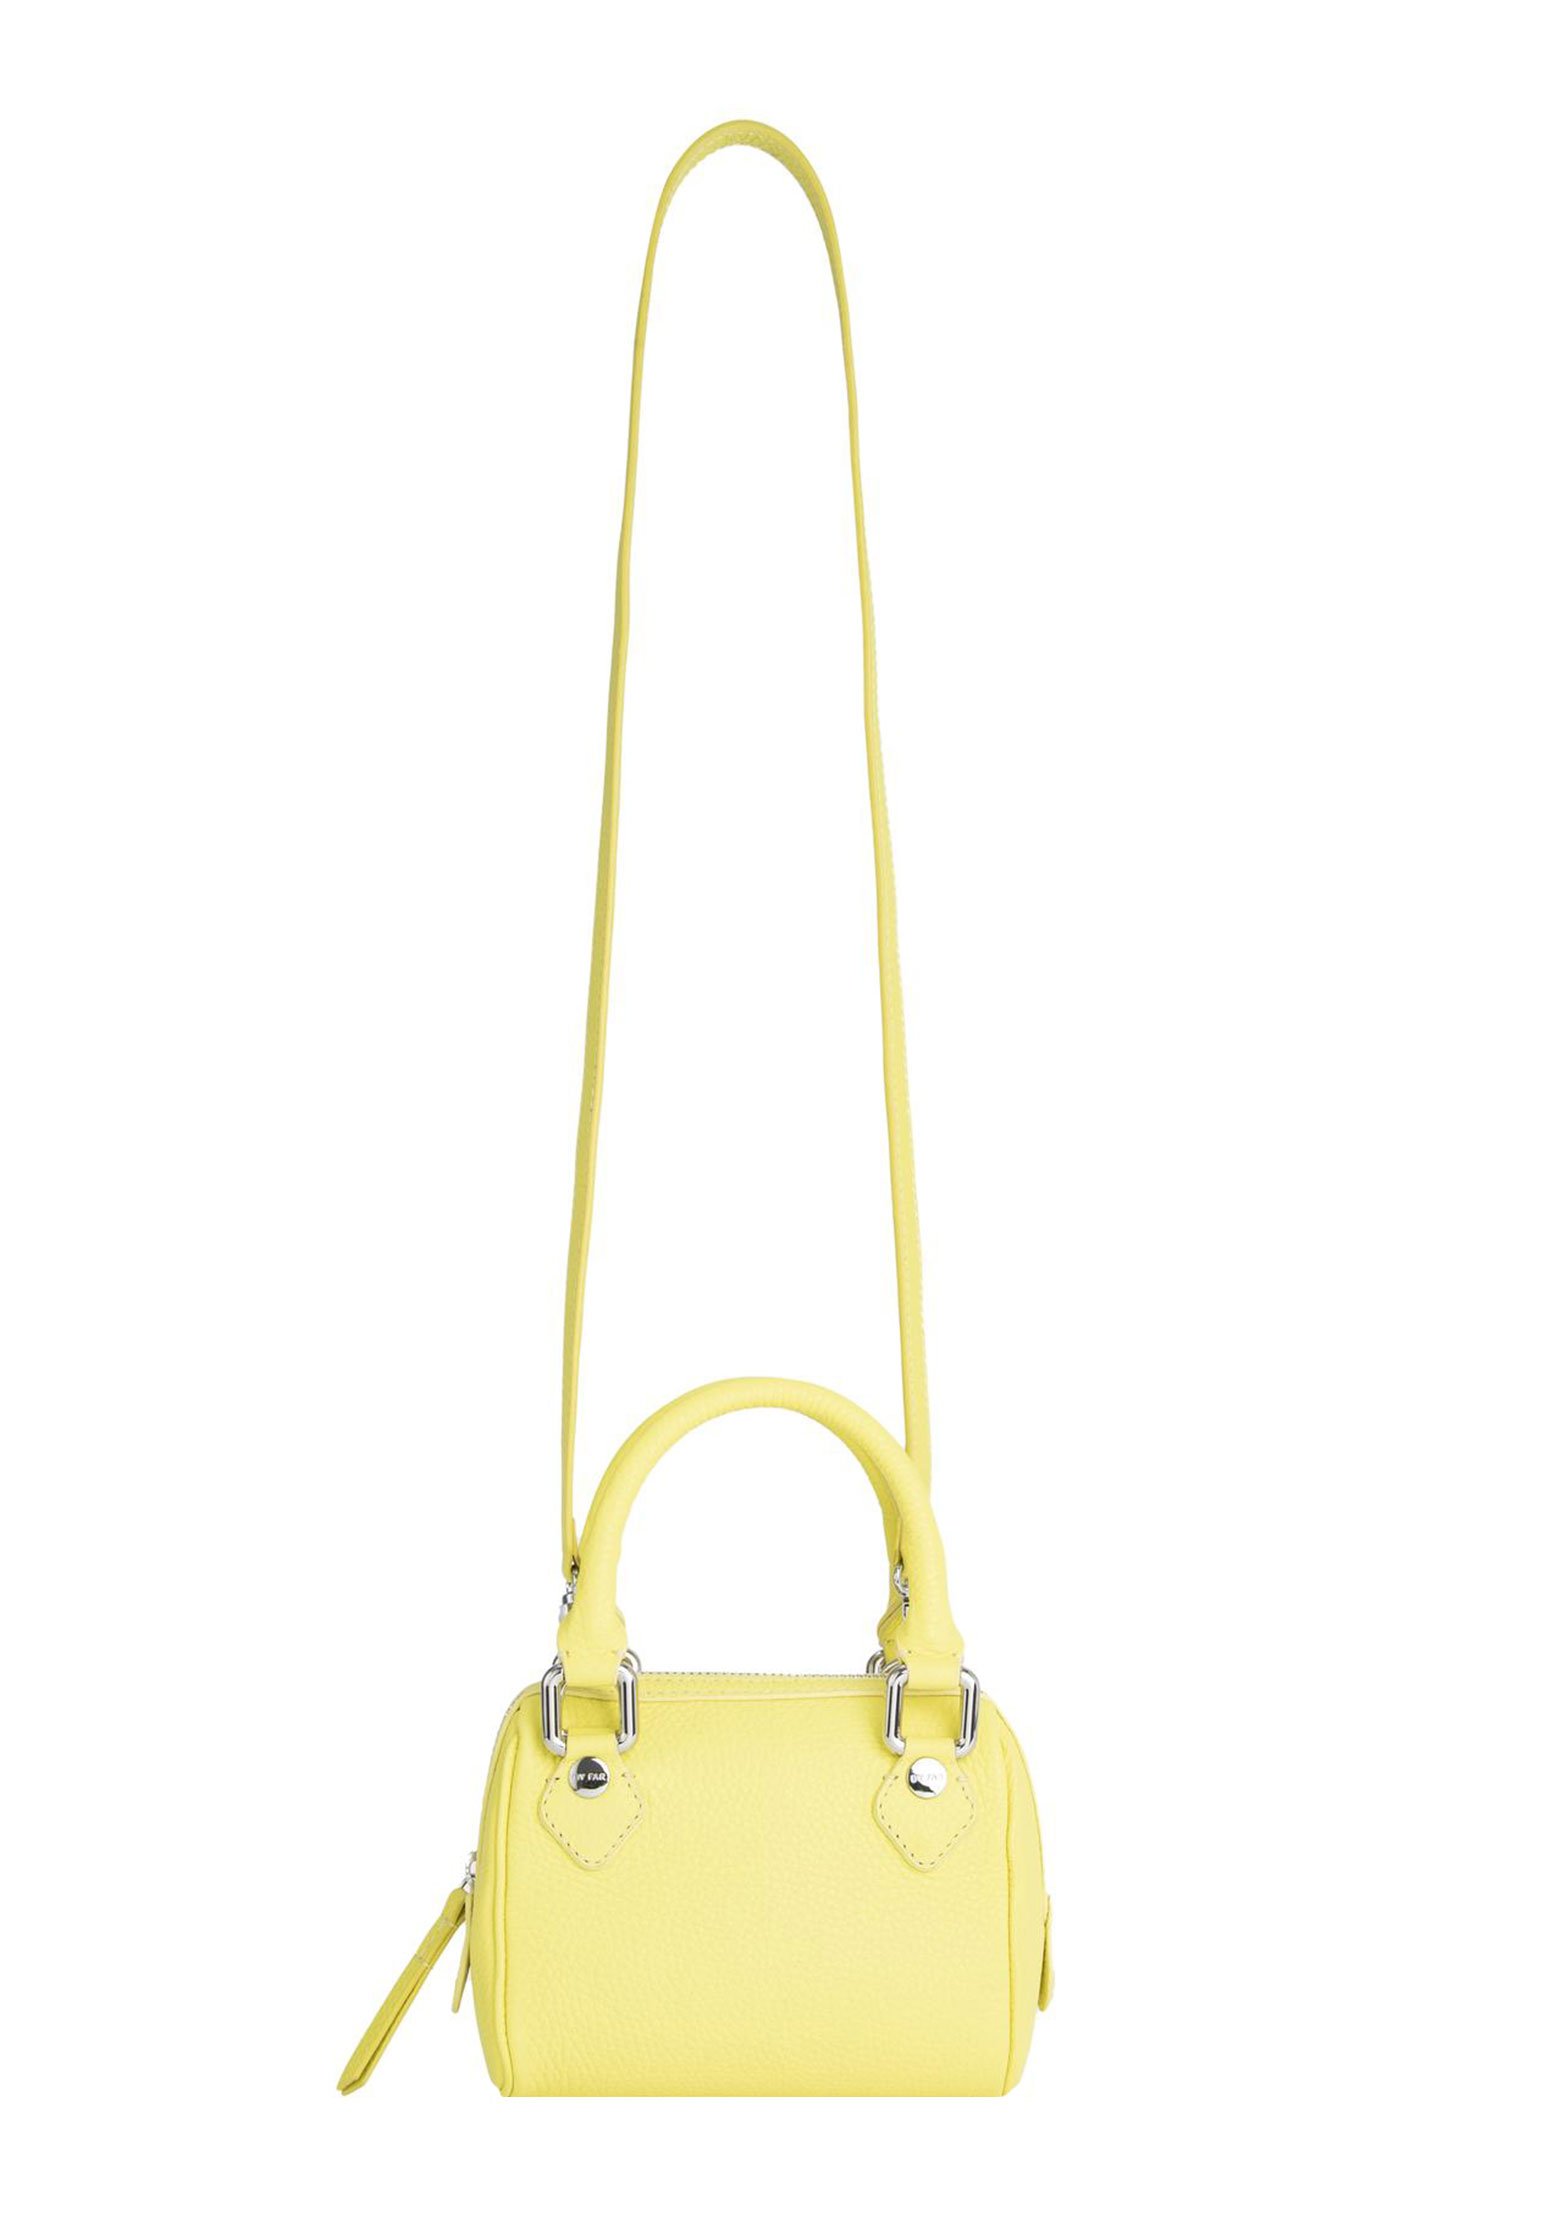 Top handle BY FAR Color: yellow (Code: 595) in online store Allure